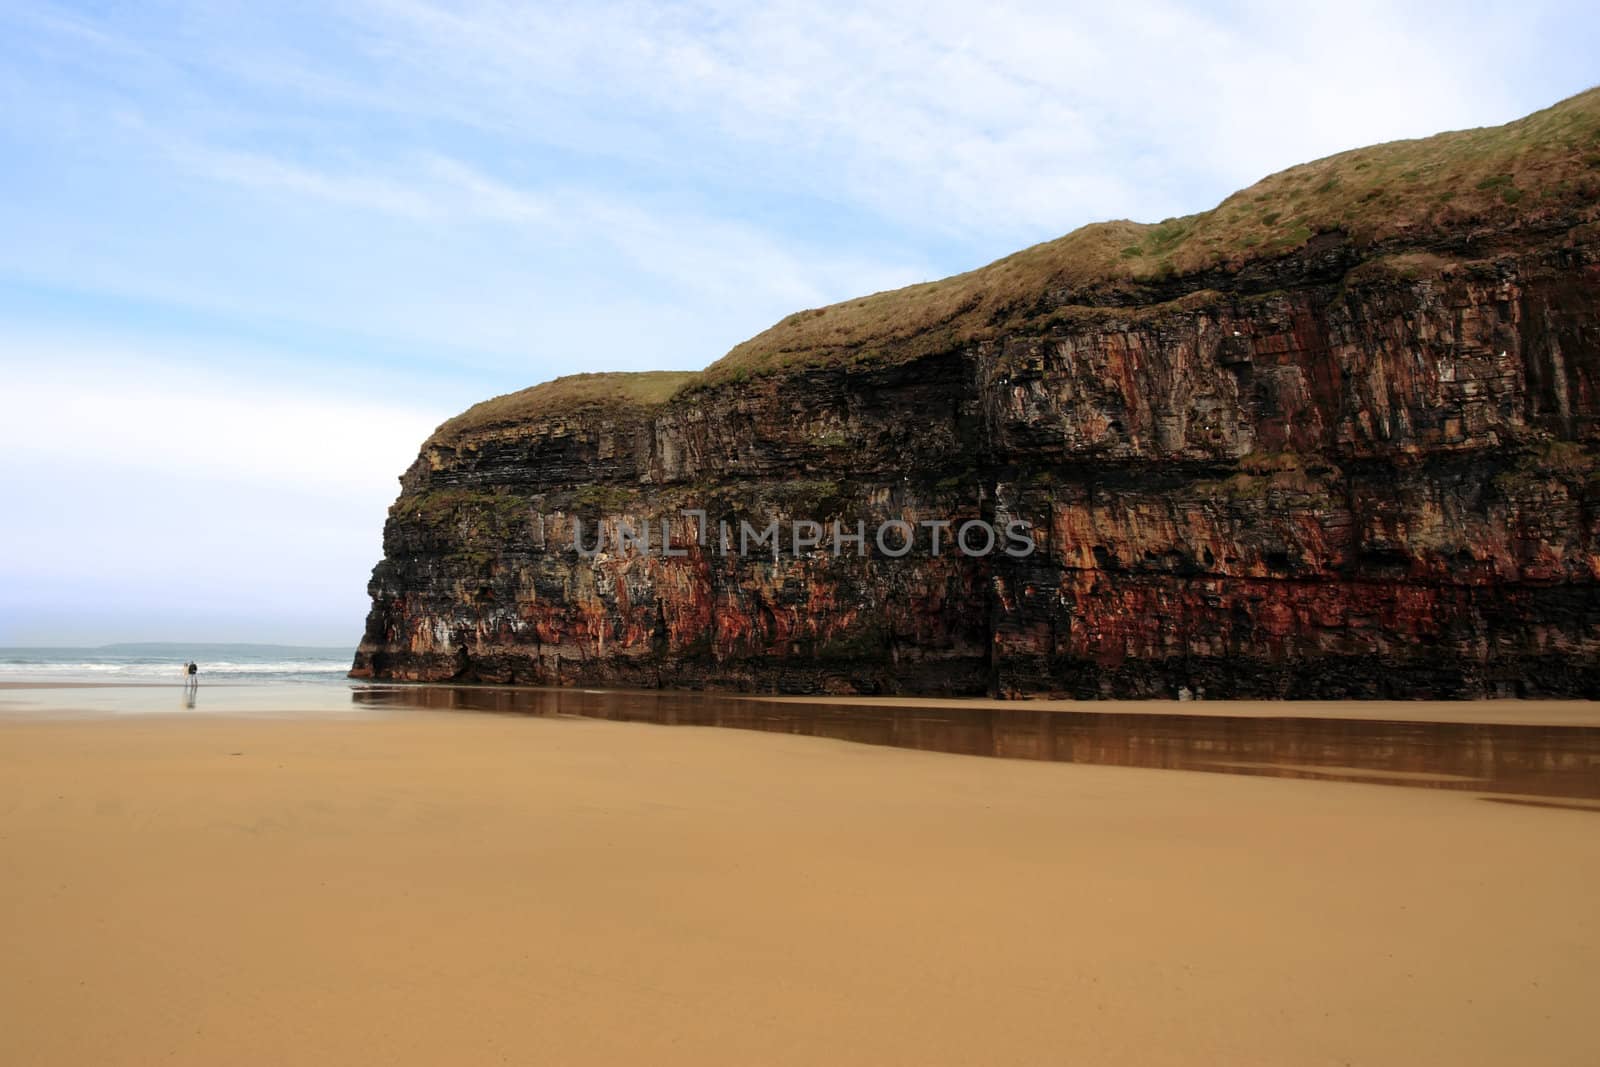 a view of a loving couple walking the beach cliffs in ballybunion co kerry ireland